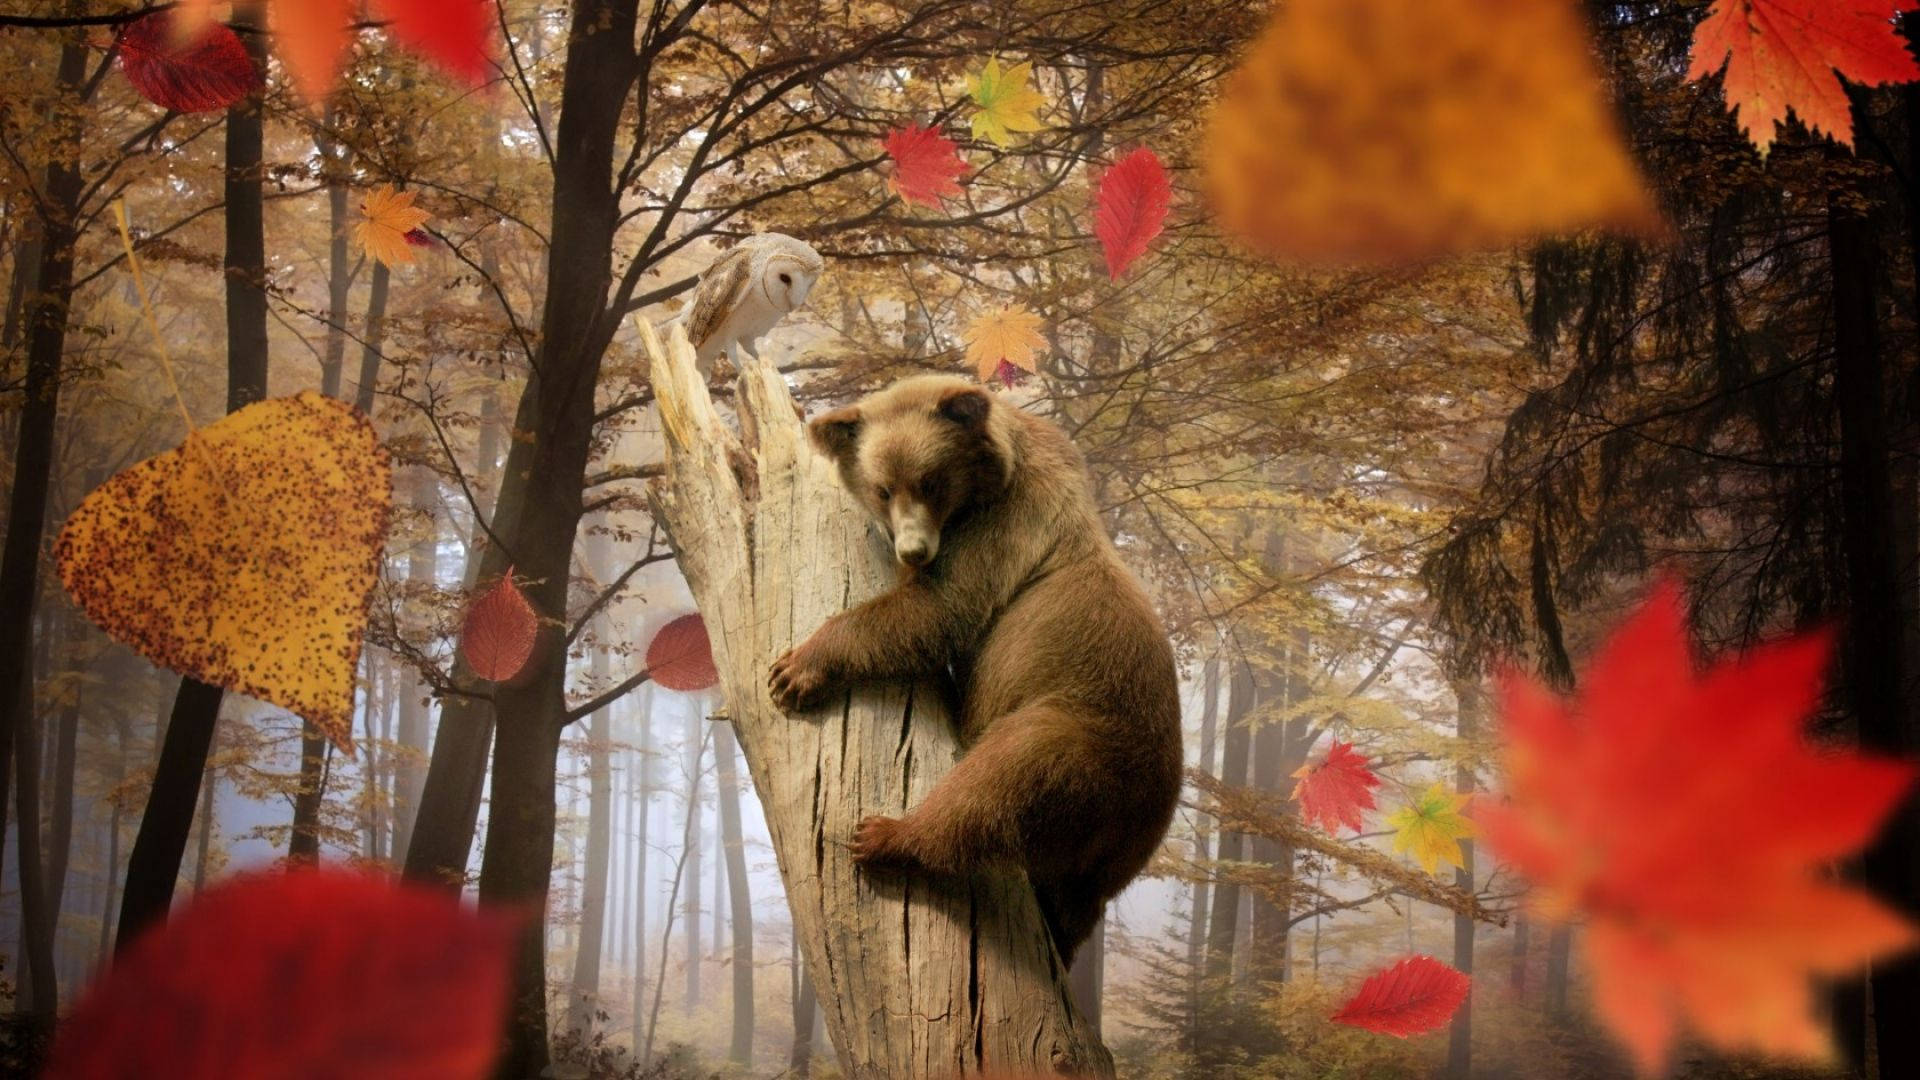 Big brown bear hugging a huge log in forest during autumn season with red maple leaves falling.